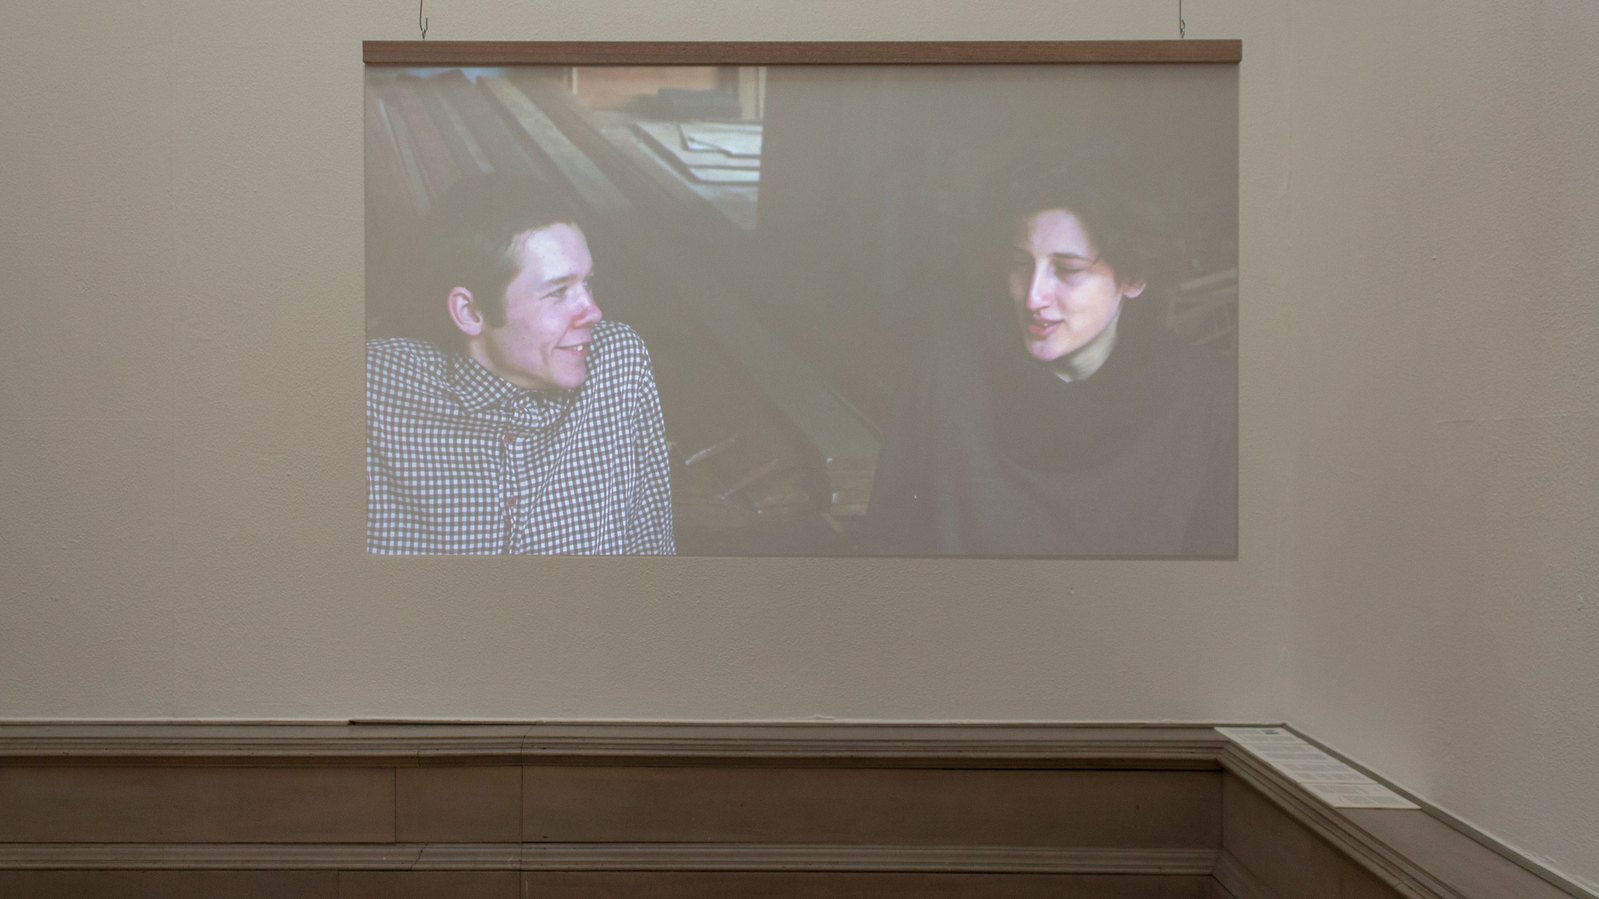 A Projection onto perspex sheet showing a male and female sitting facing each amongst some slats of wood